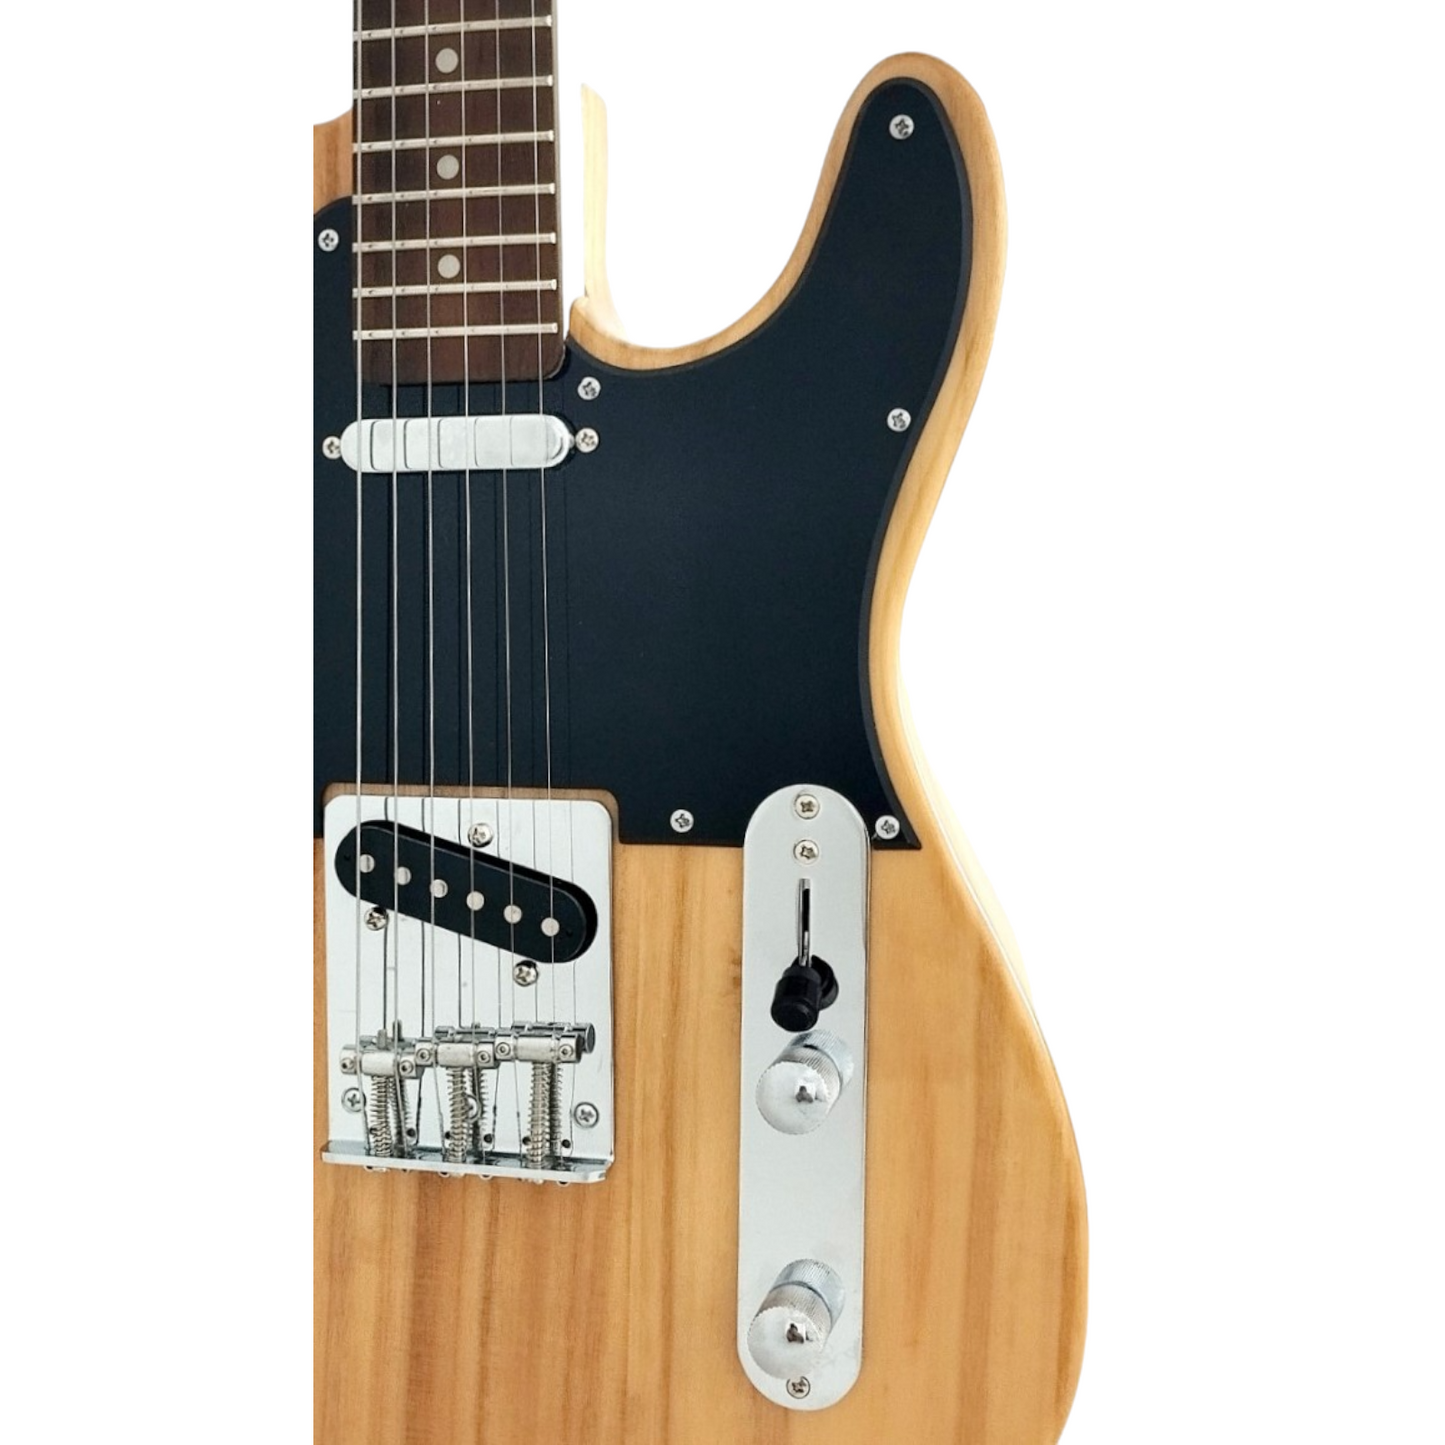 Haze Solid Paulownia Body with Maple Neck Rosewood Fingerboard HTL Electric Guitar - Natural HSTL10NT